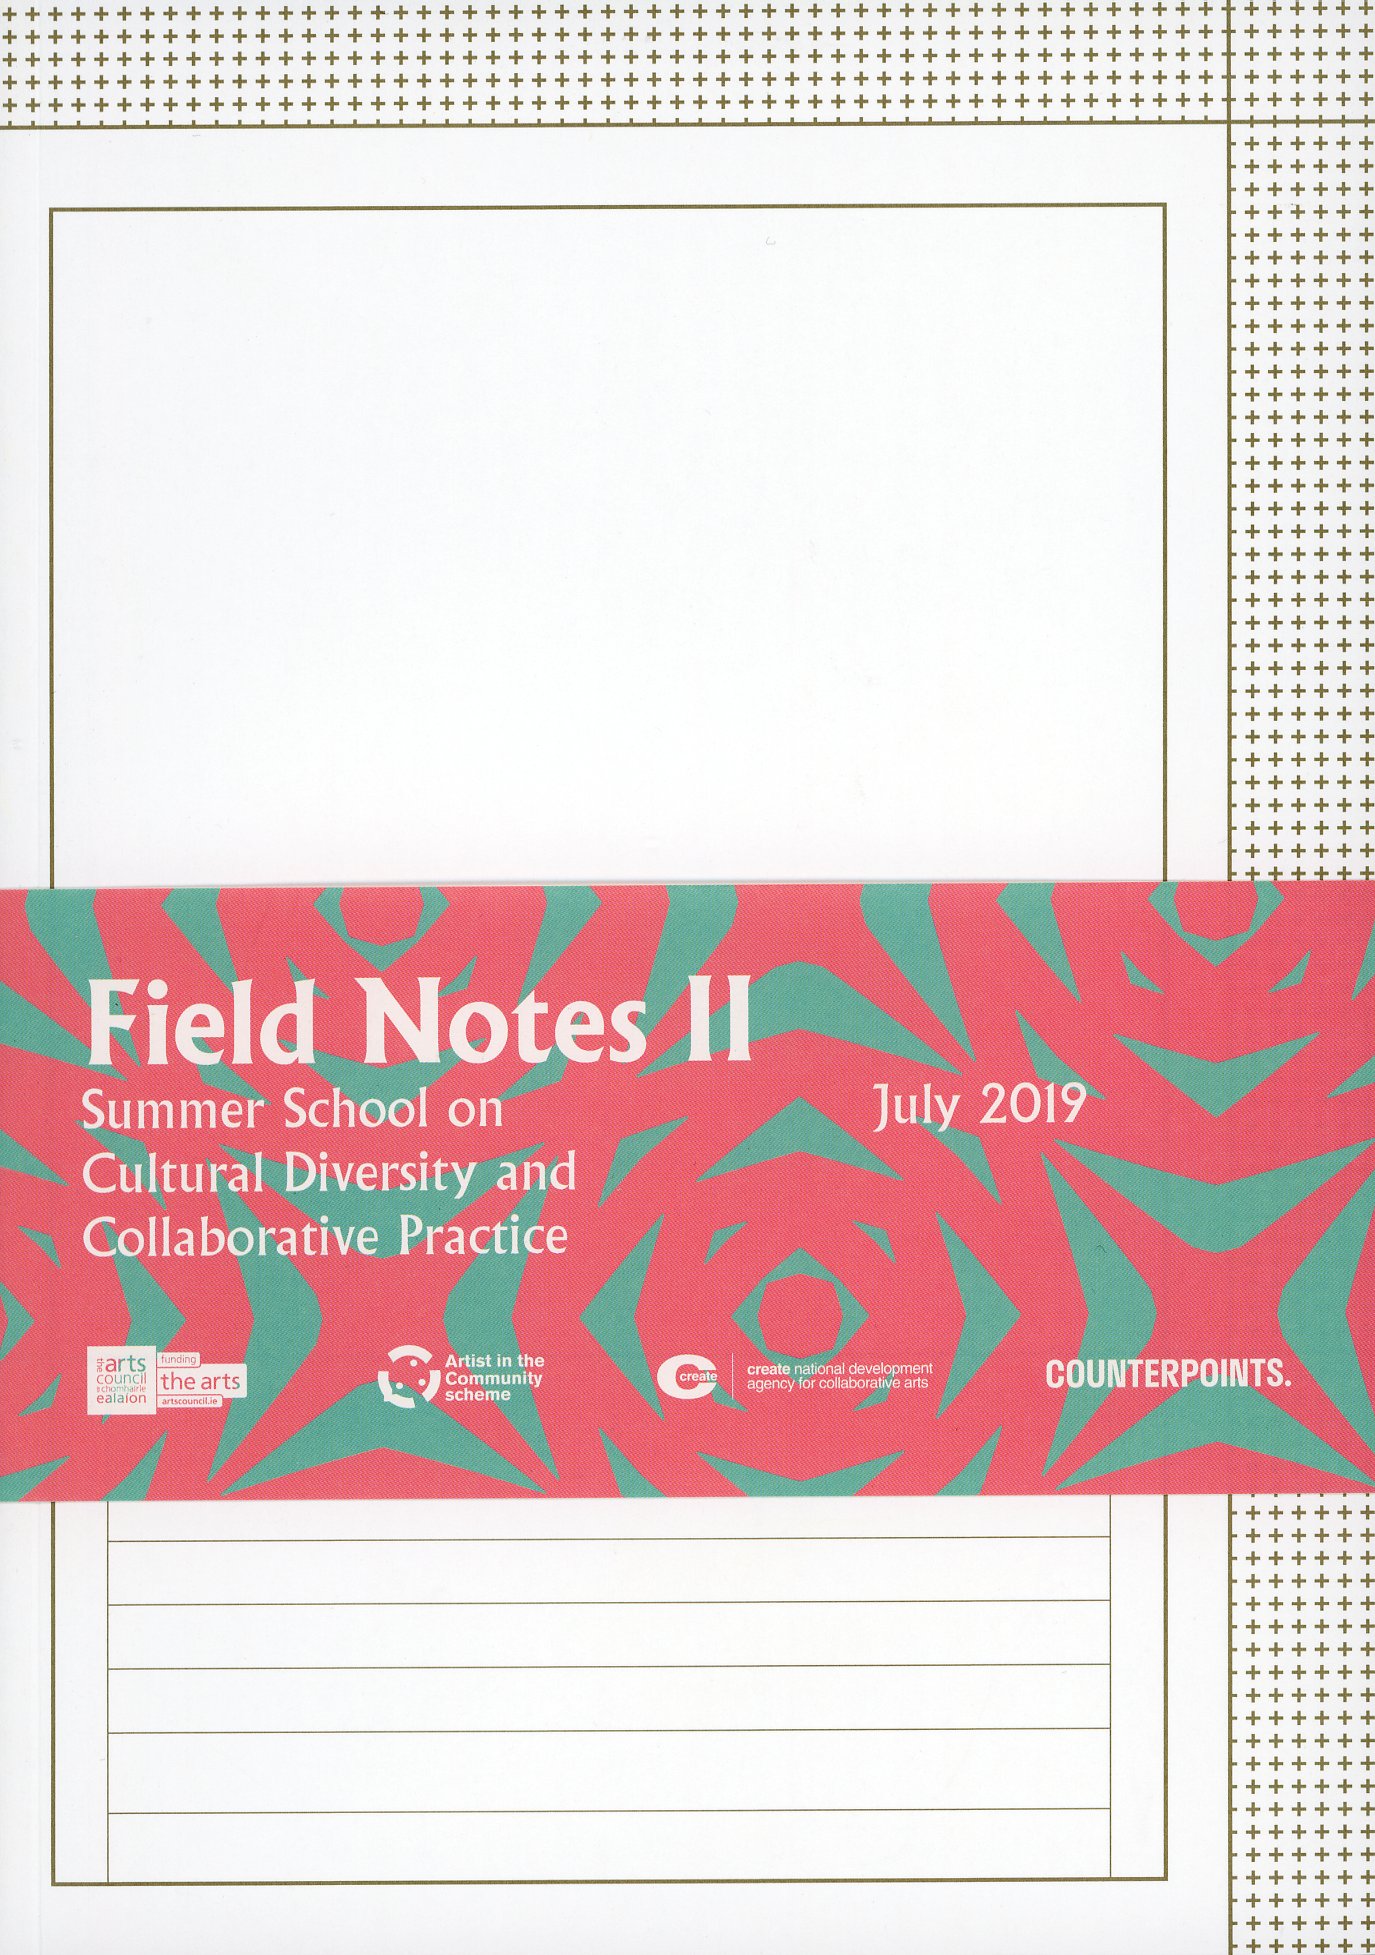 Field Notes II: The Inaugural Summer School on Cultural Diversity and Collaborative Practice